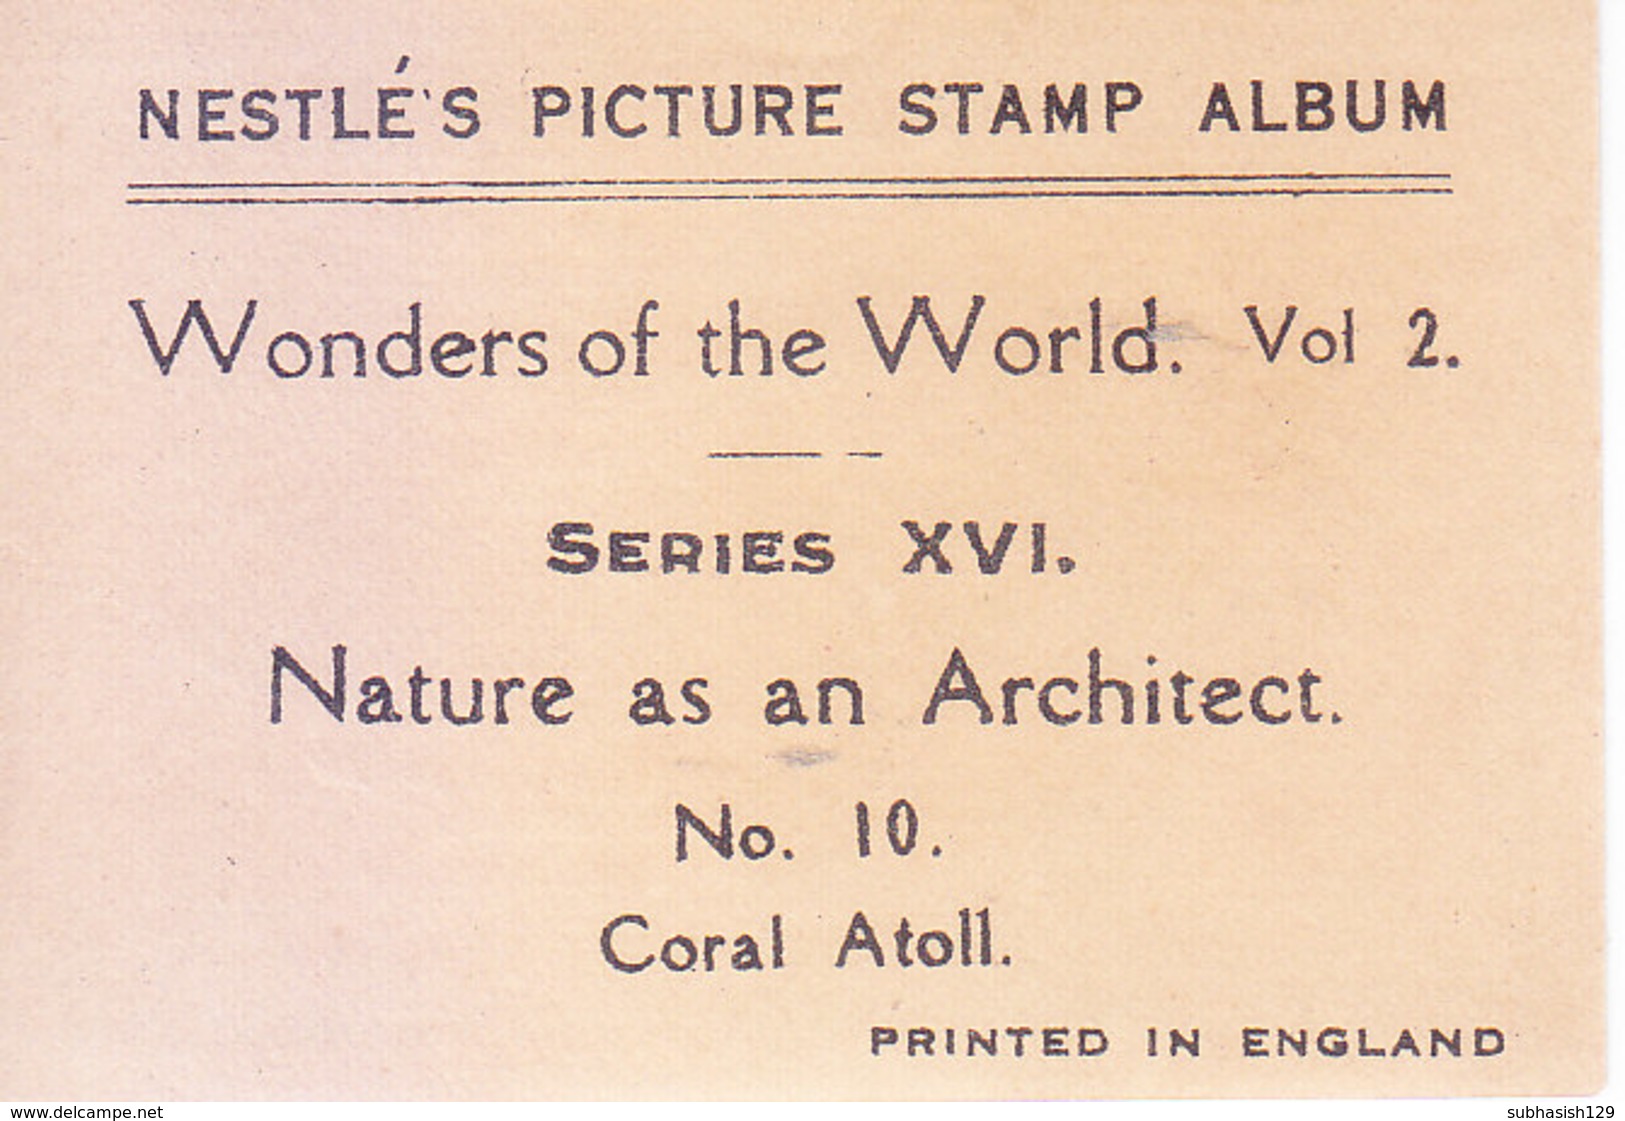 SWITZERLAND - NESTLE 'S PICTURE STAMP / CARD / LABEL - NATURE AS AN ARCHITECT - Publicitaires